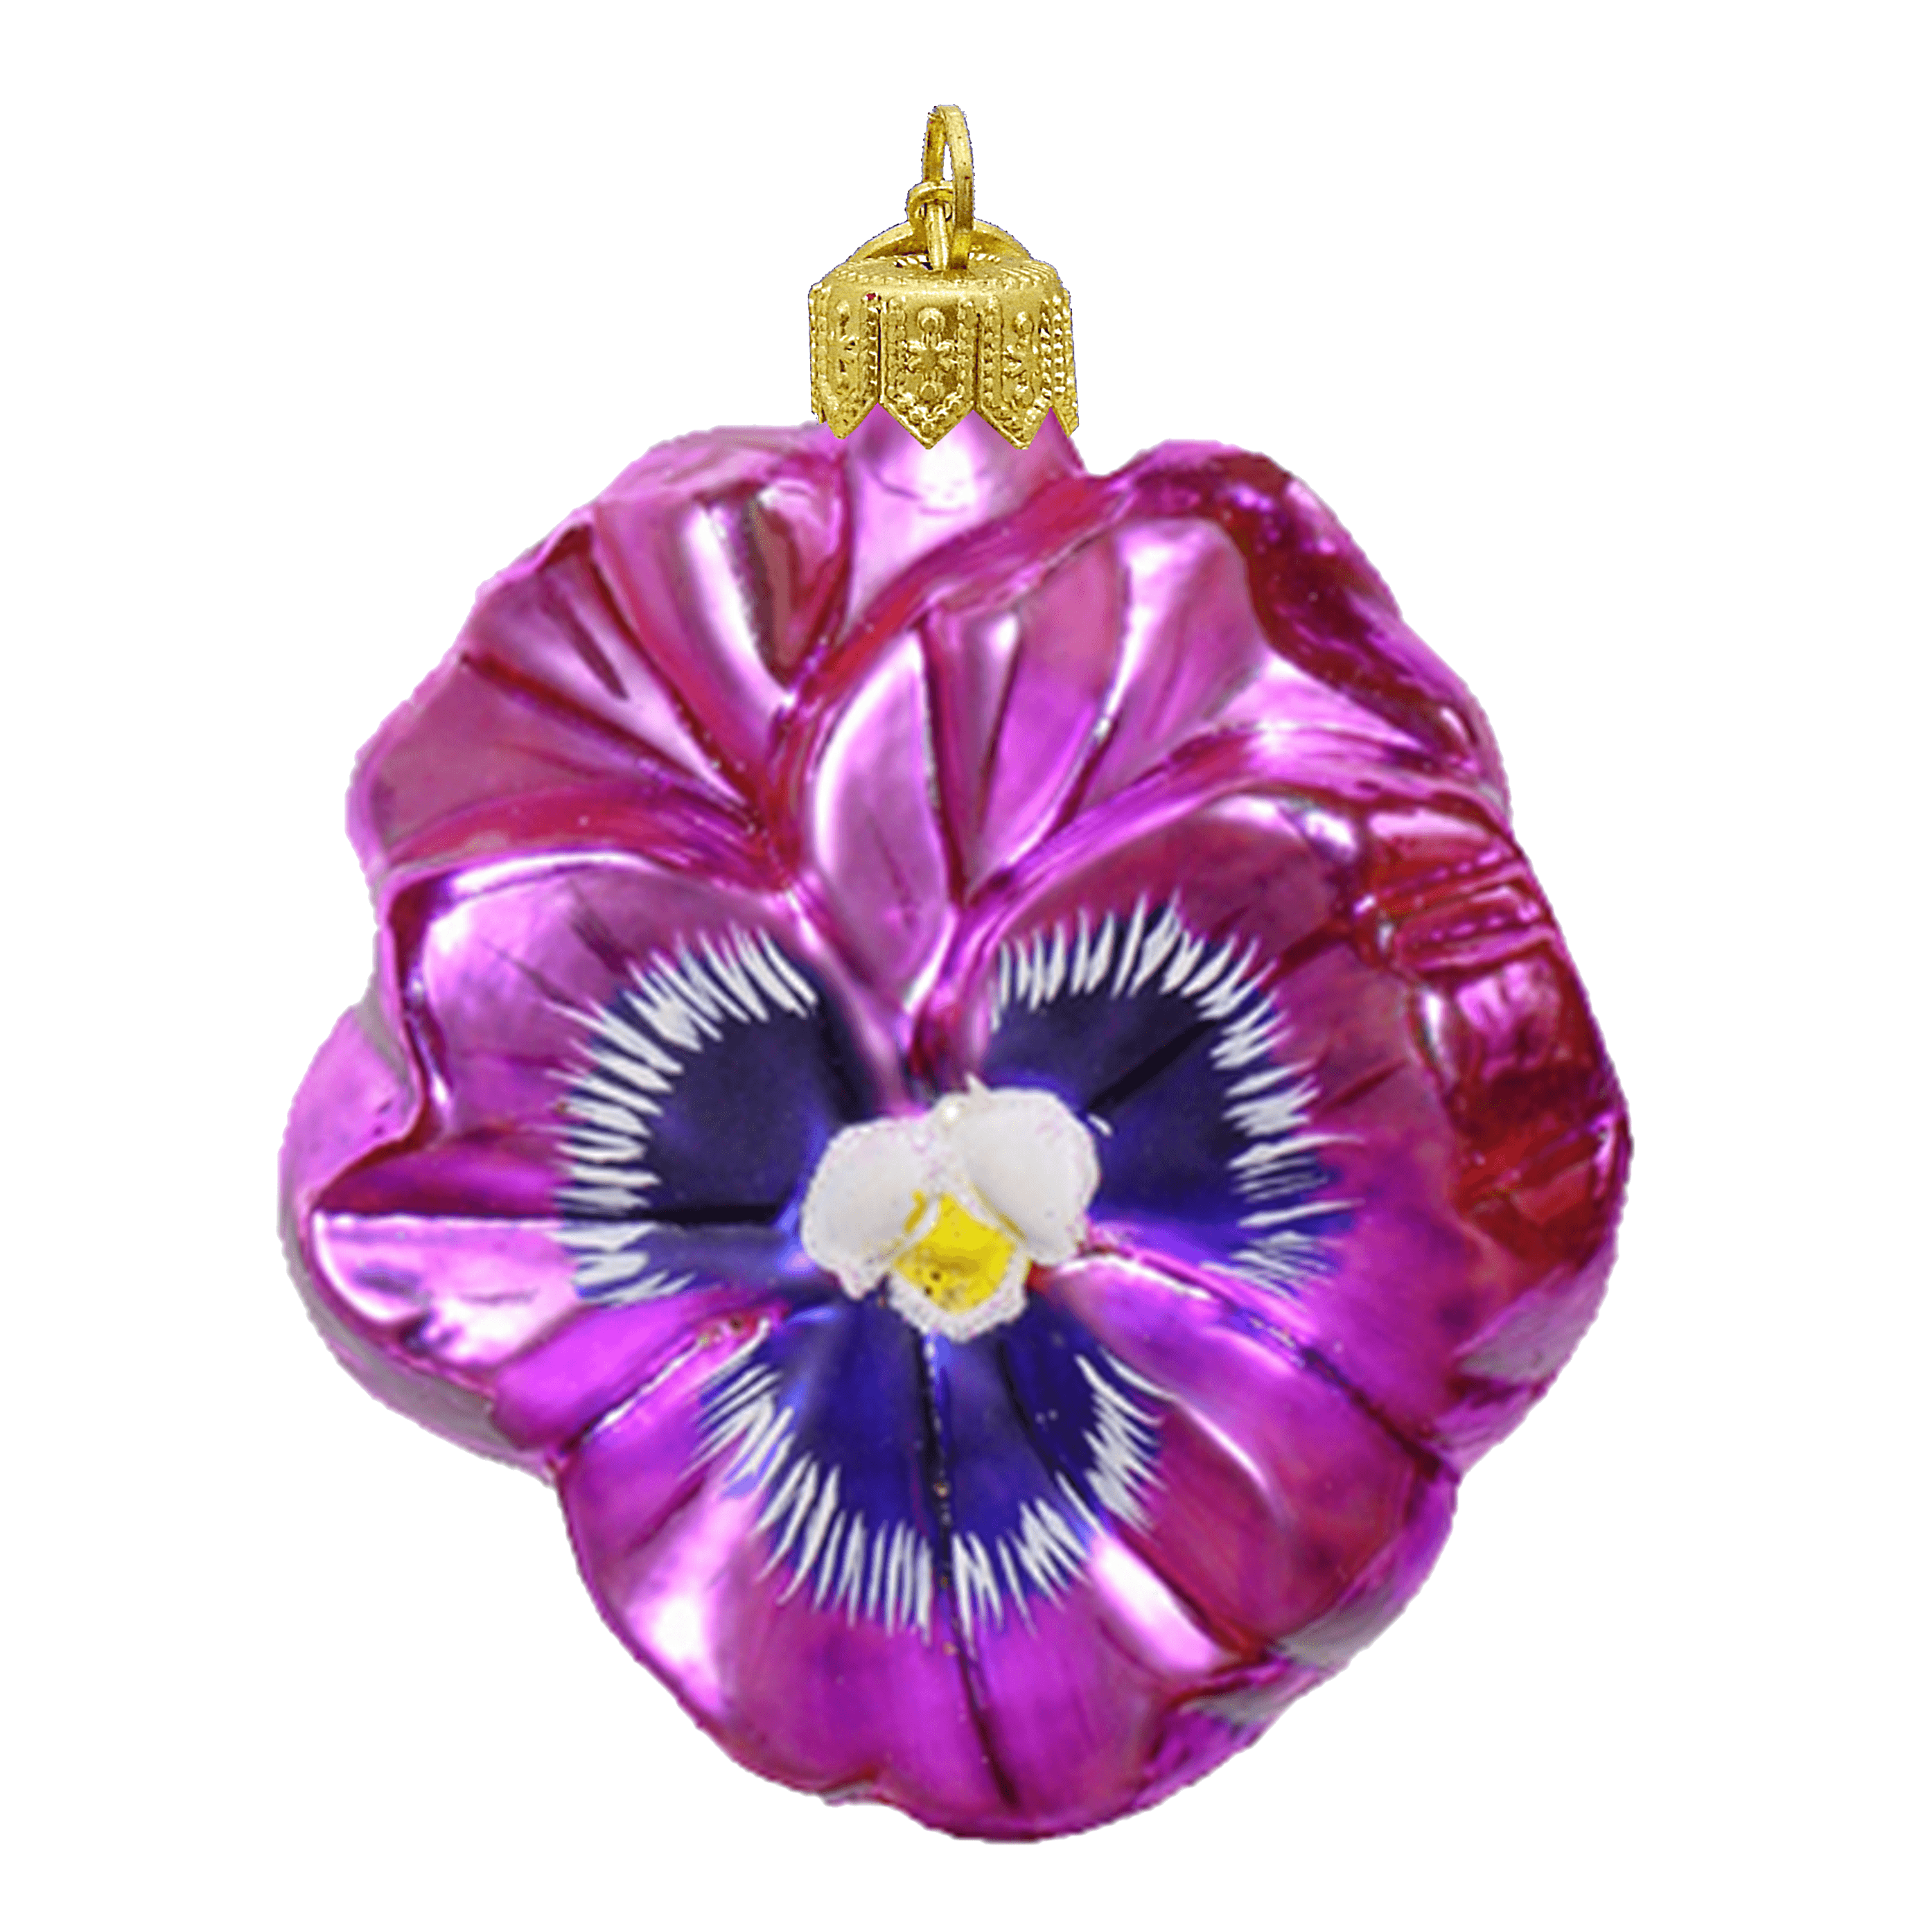 Pink Pansy Ornament | Adler's of New Orleans